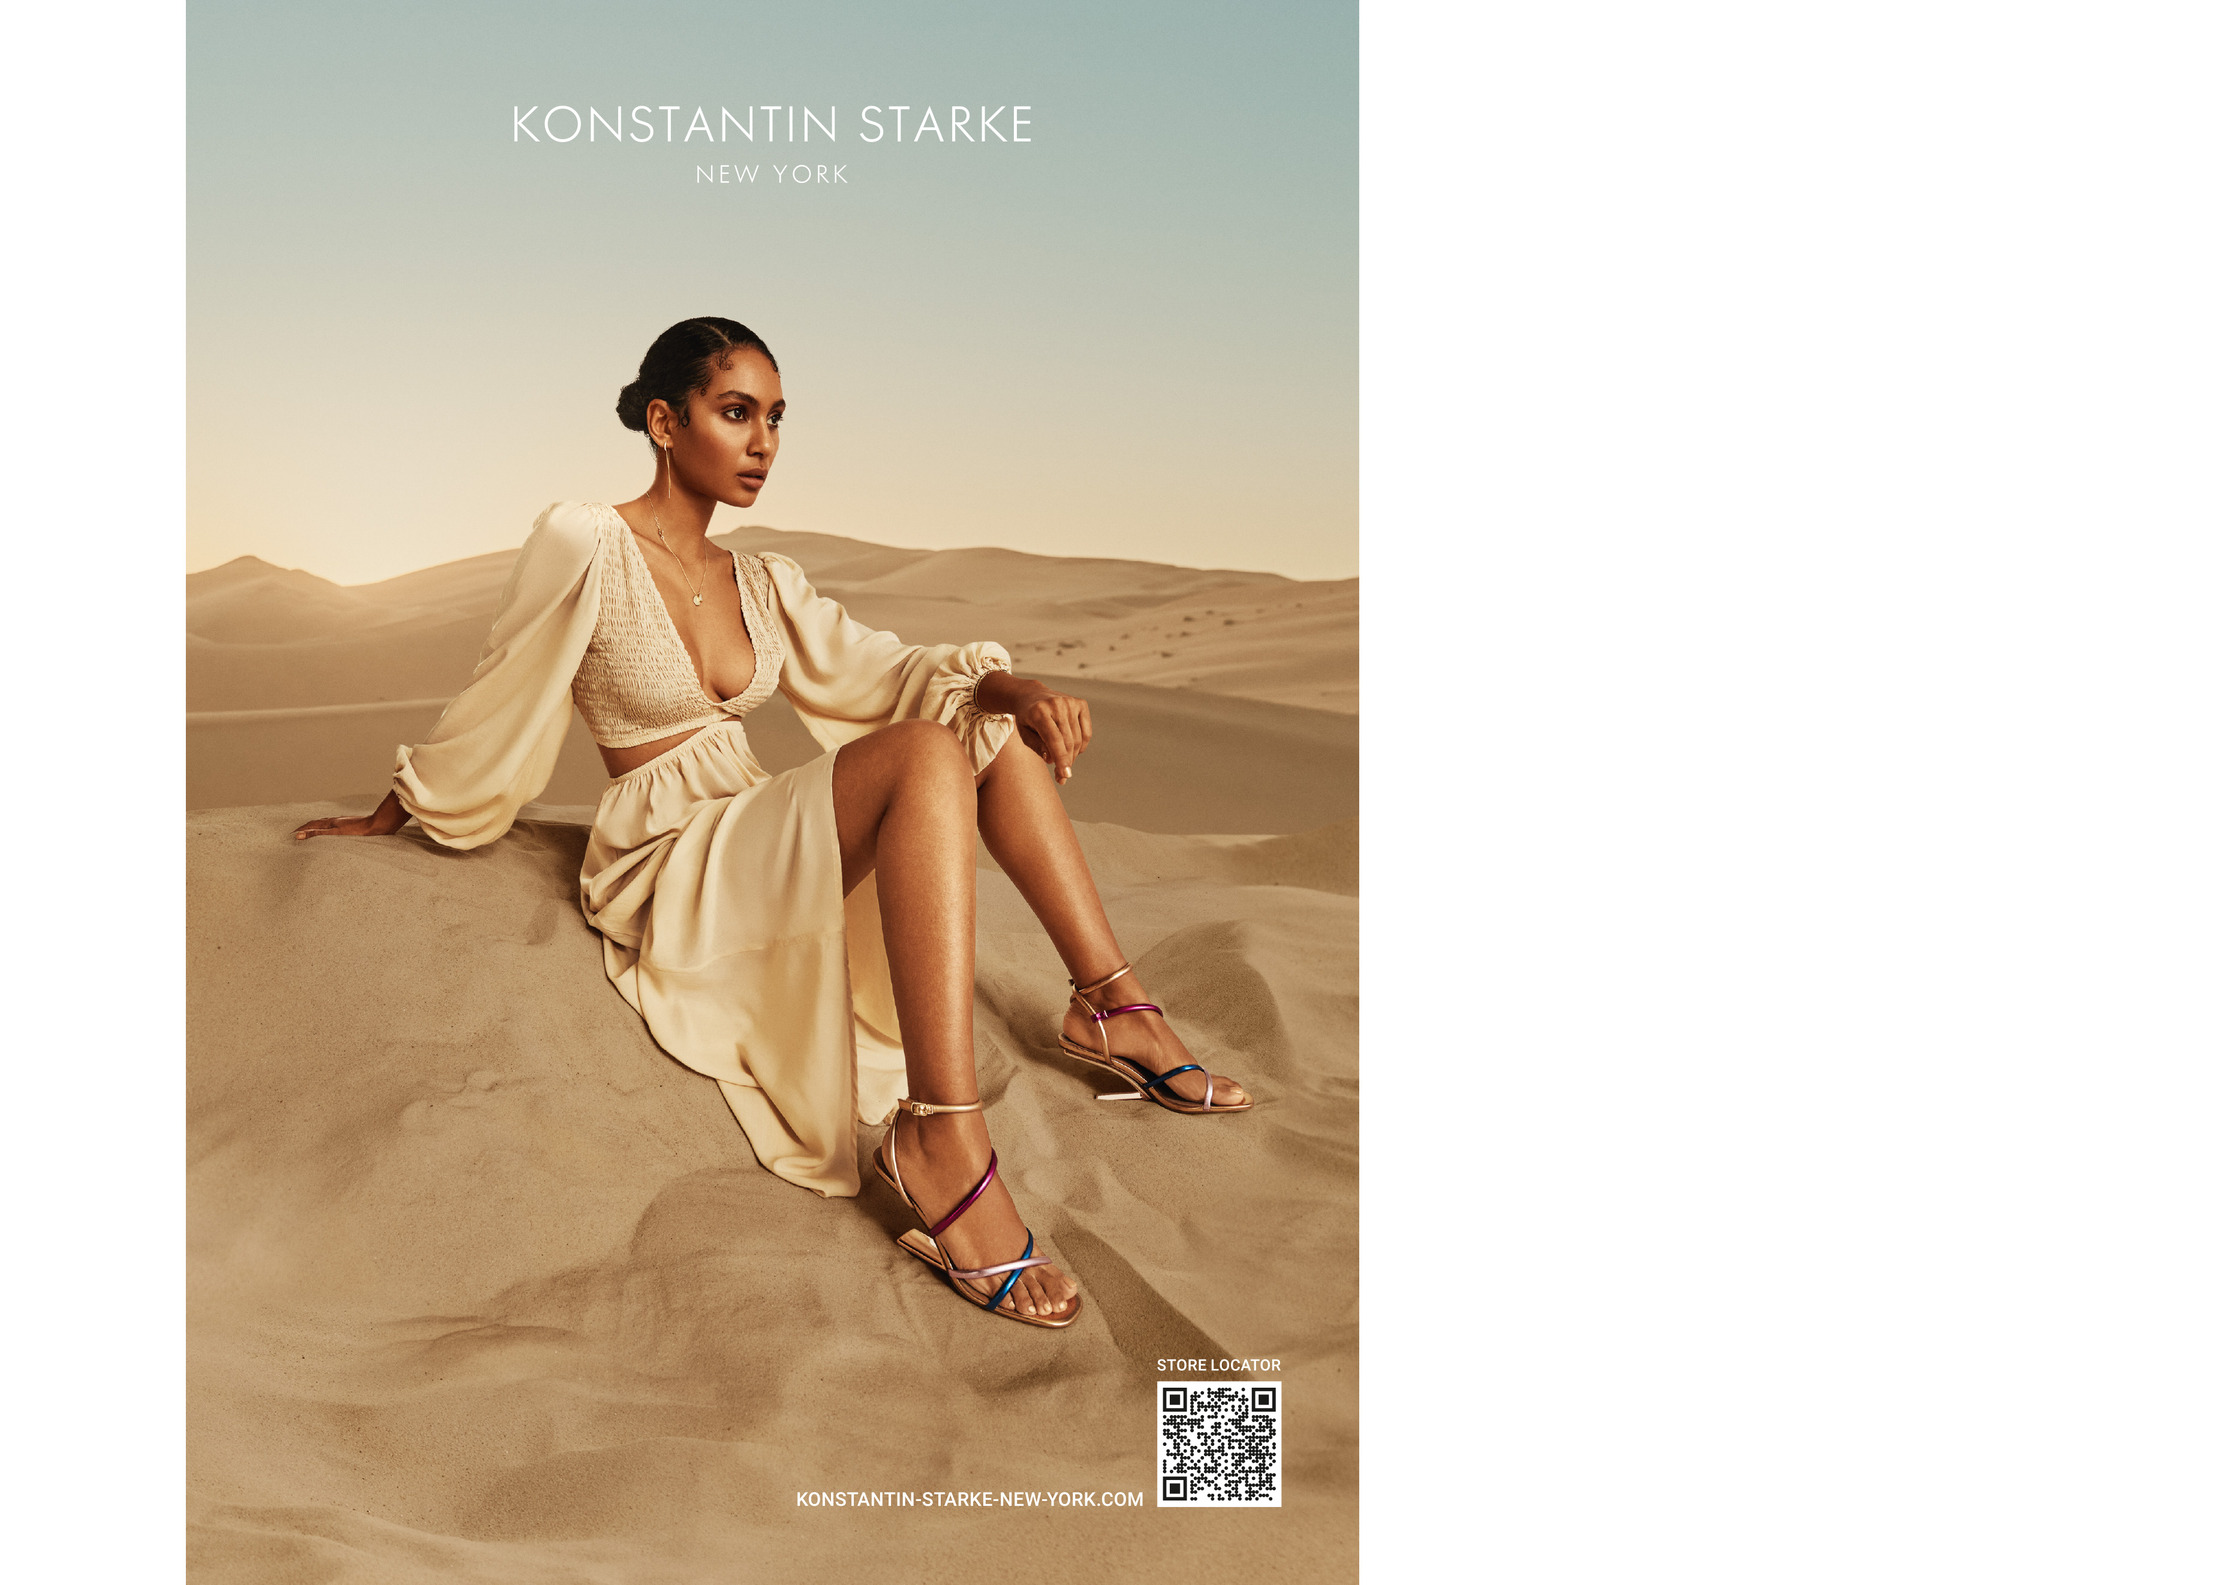 a woman in a dress sitting on a sand dune. advertising key visual for konstantin starke new york.